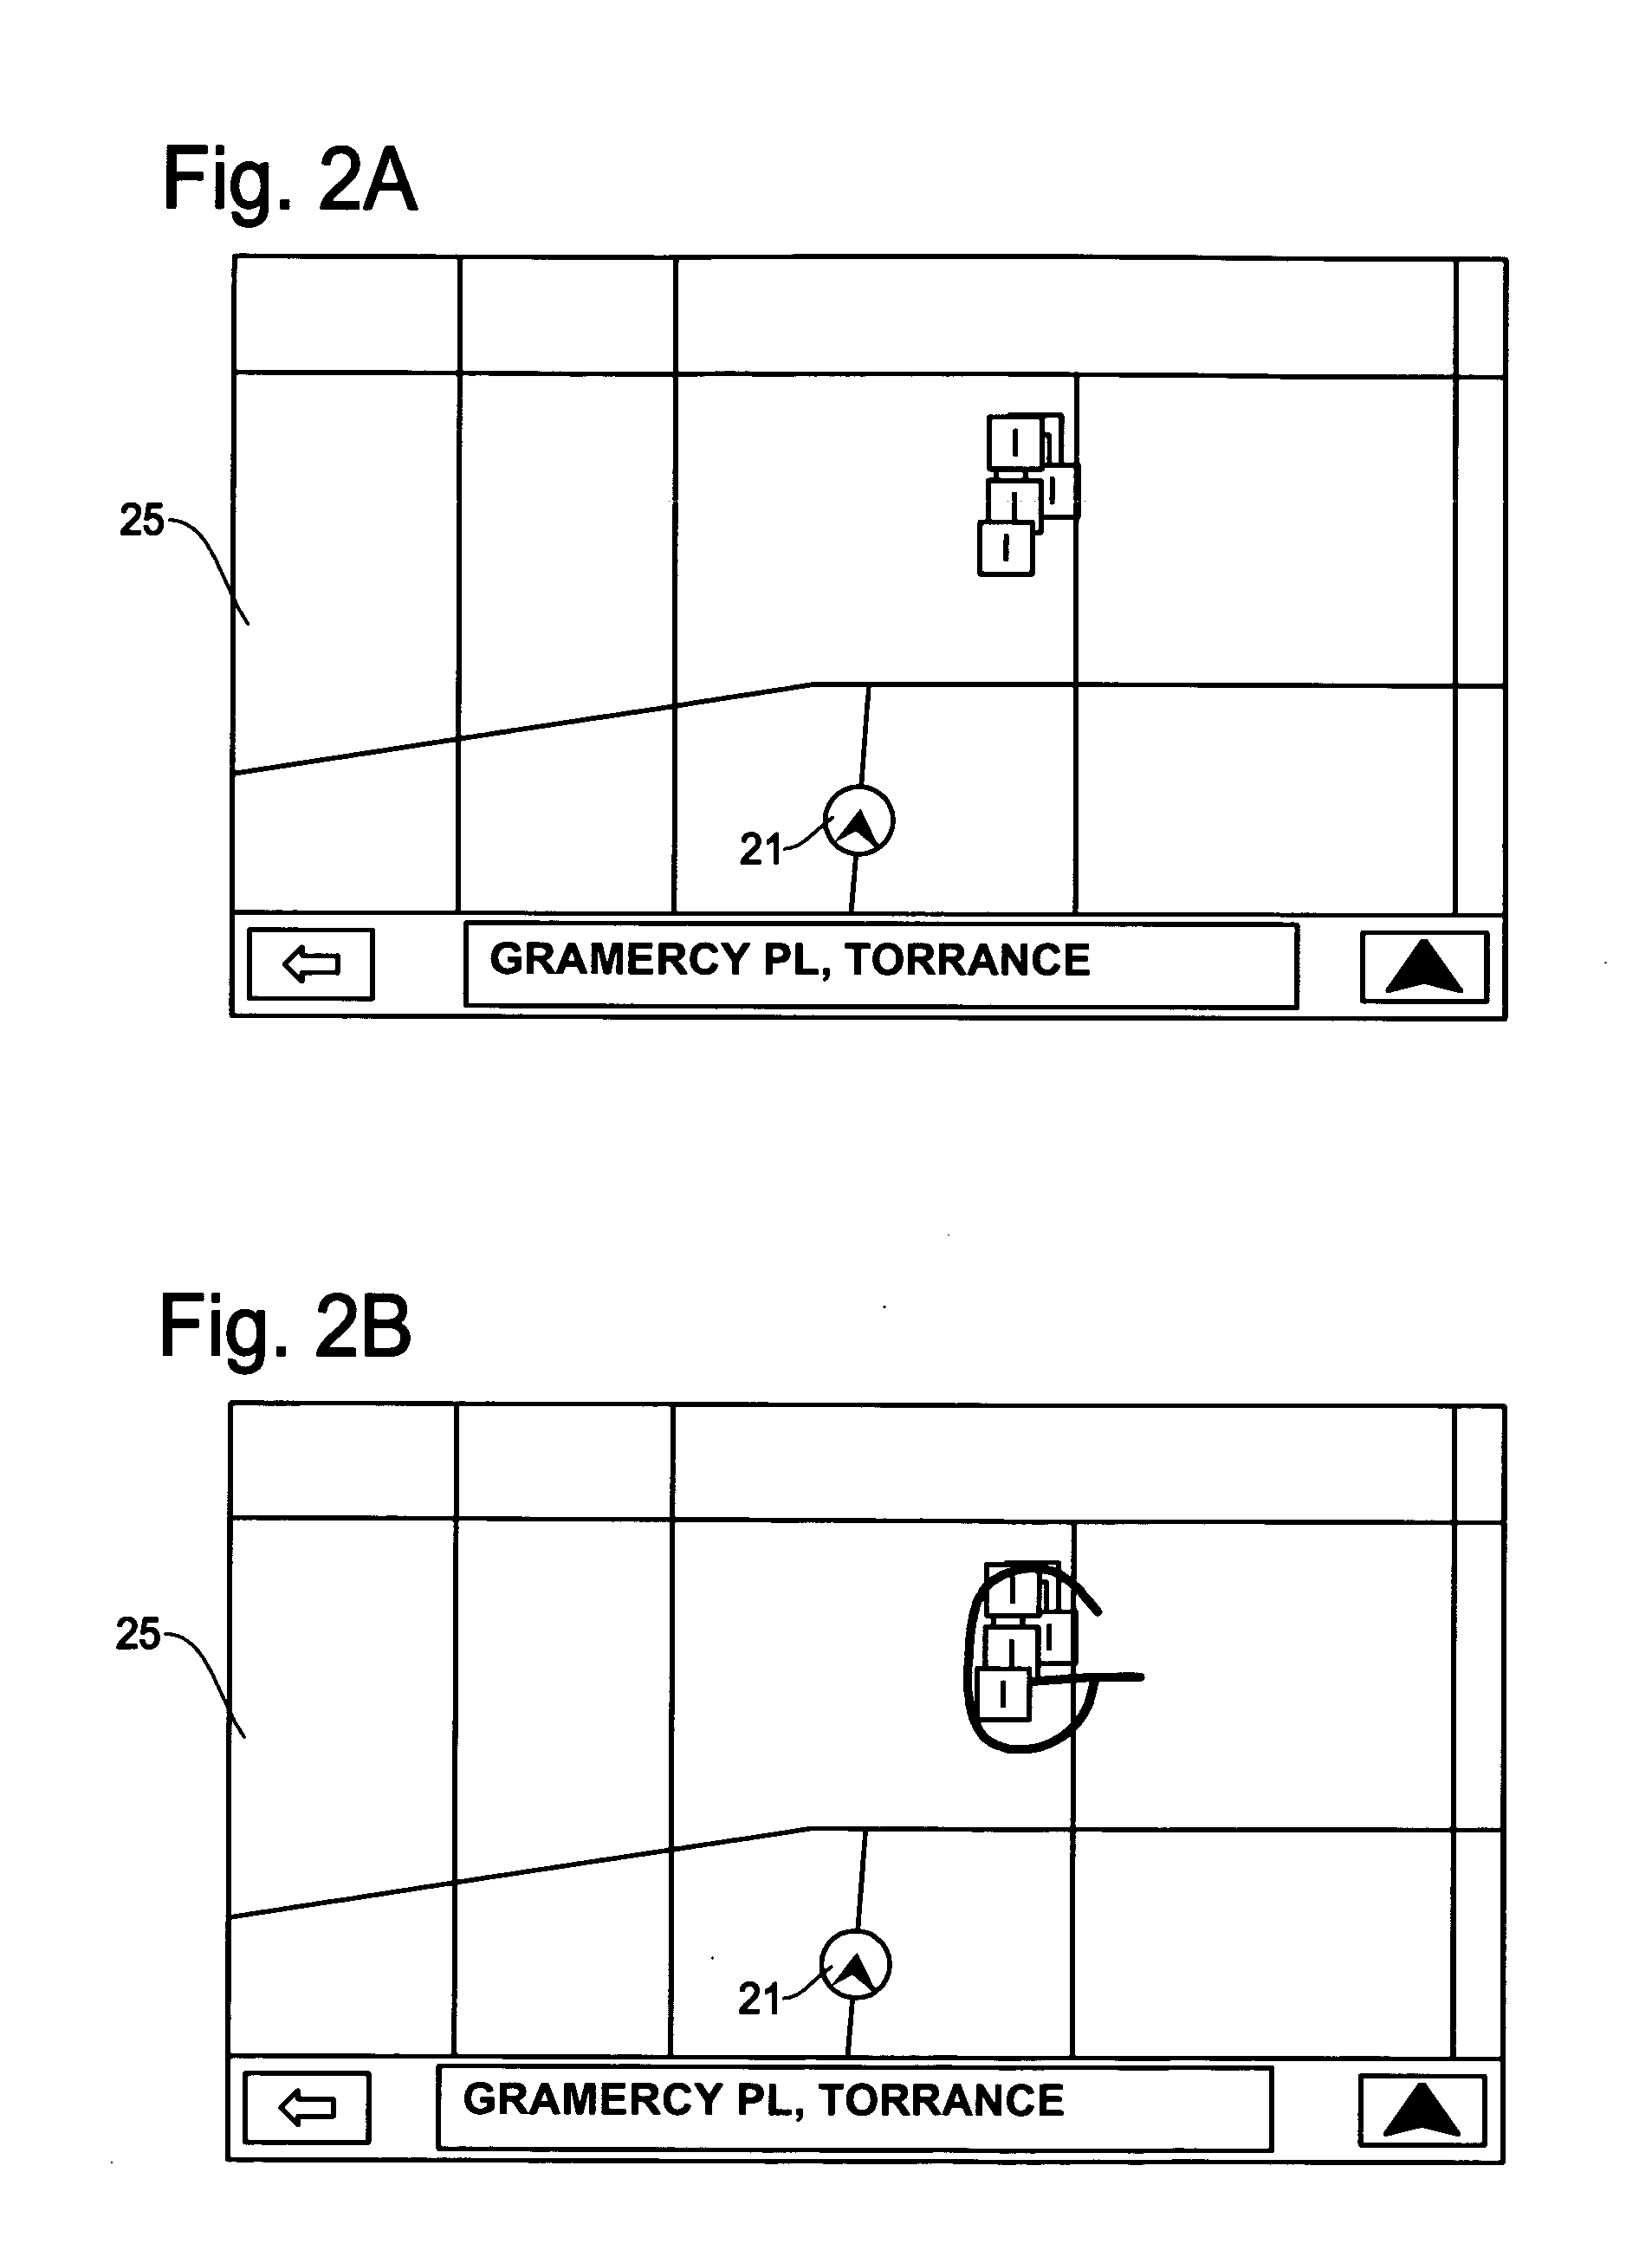 Method and apparatus for navigation system for selecting icons and application area by hand drawing on map image